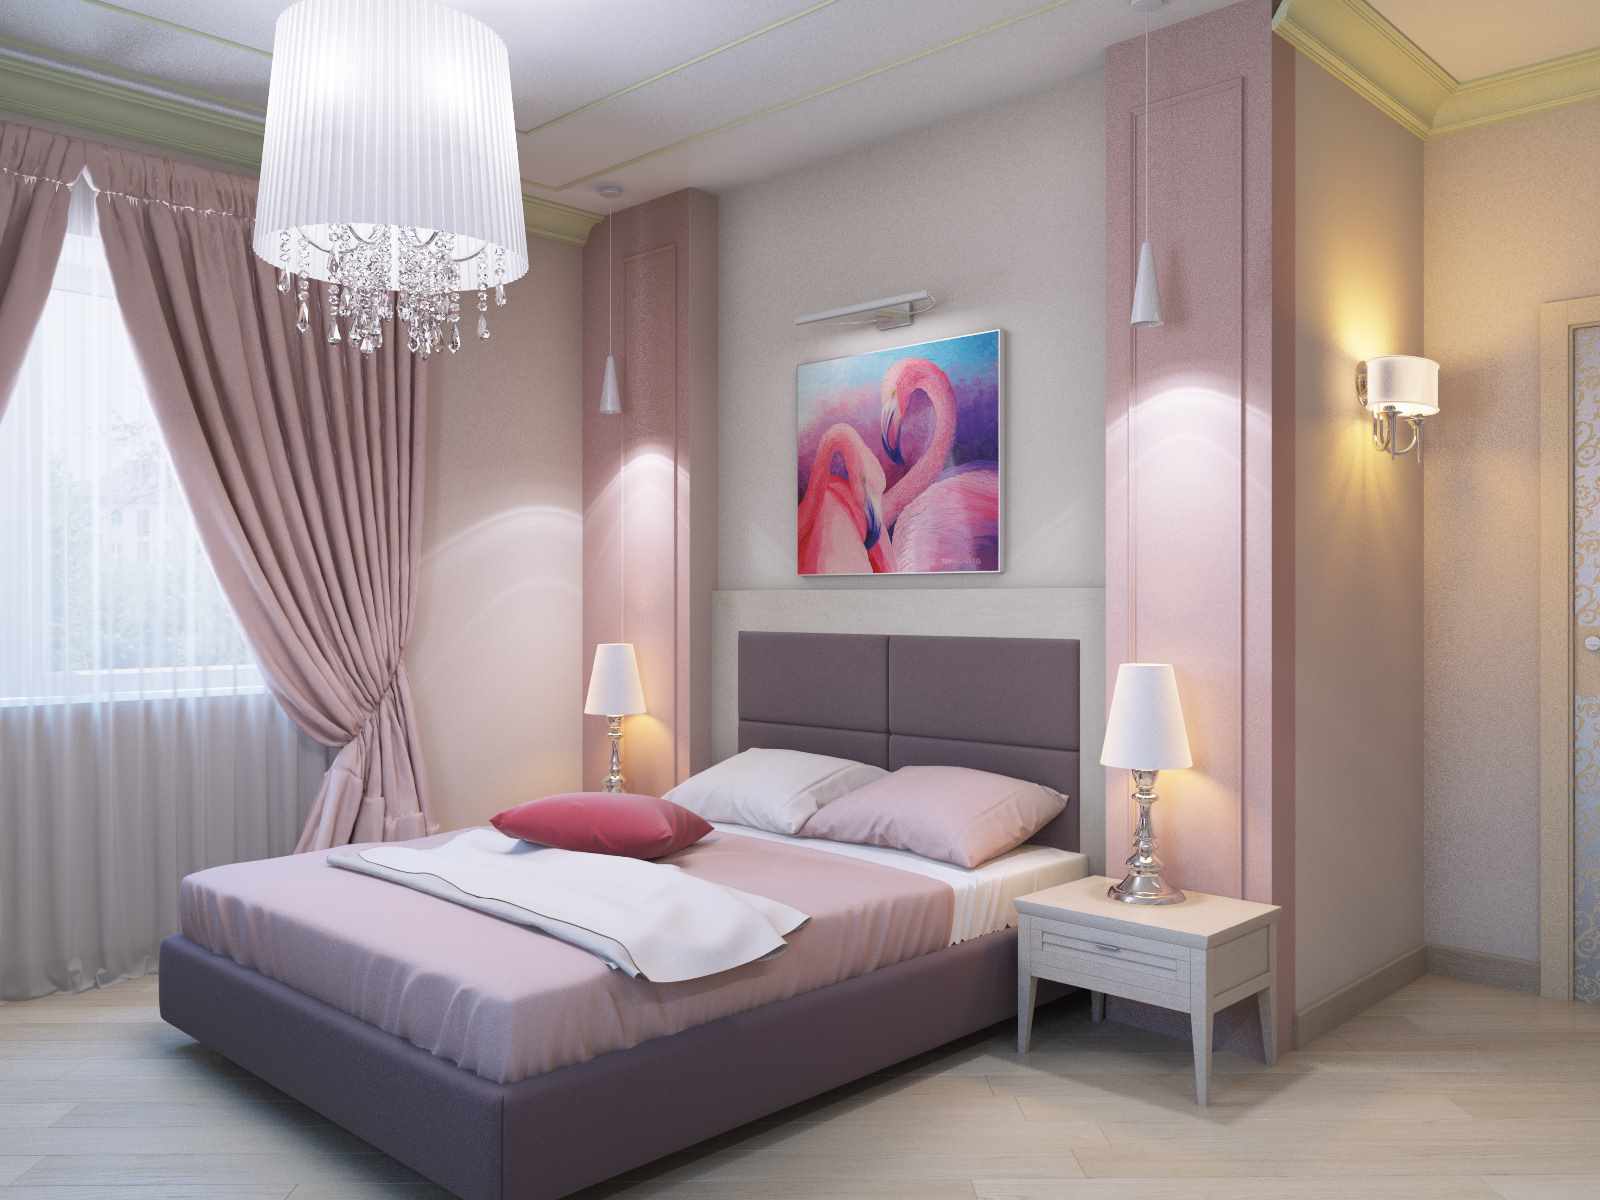 An example of a bright decoration of the style of walls in the bedroom